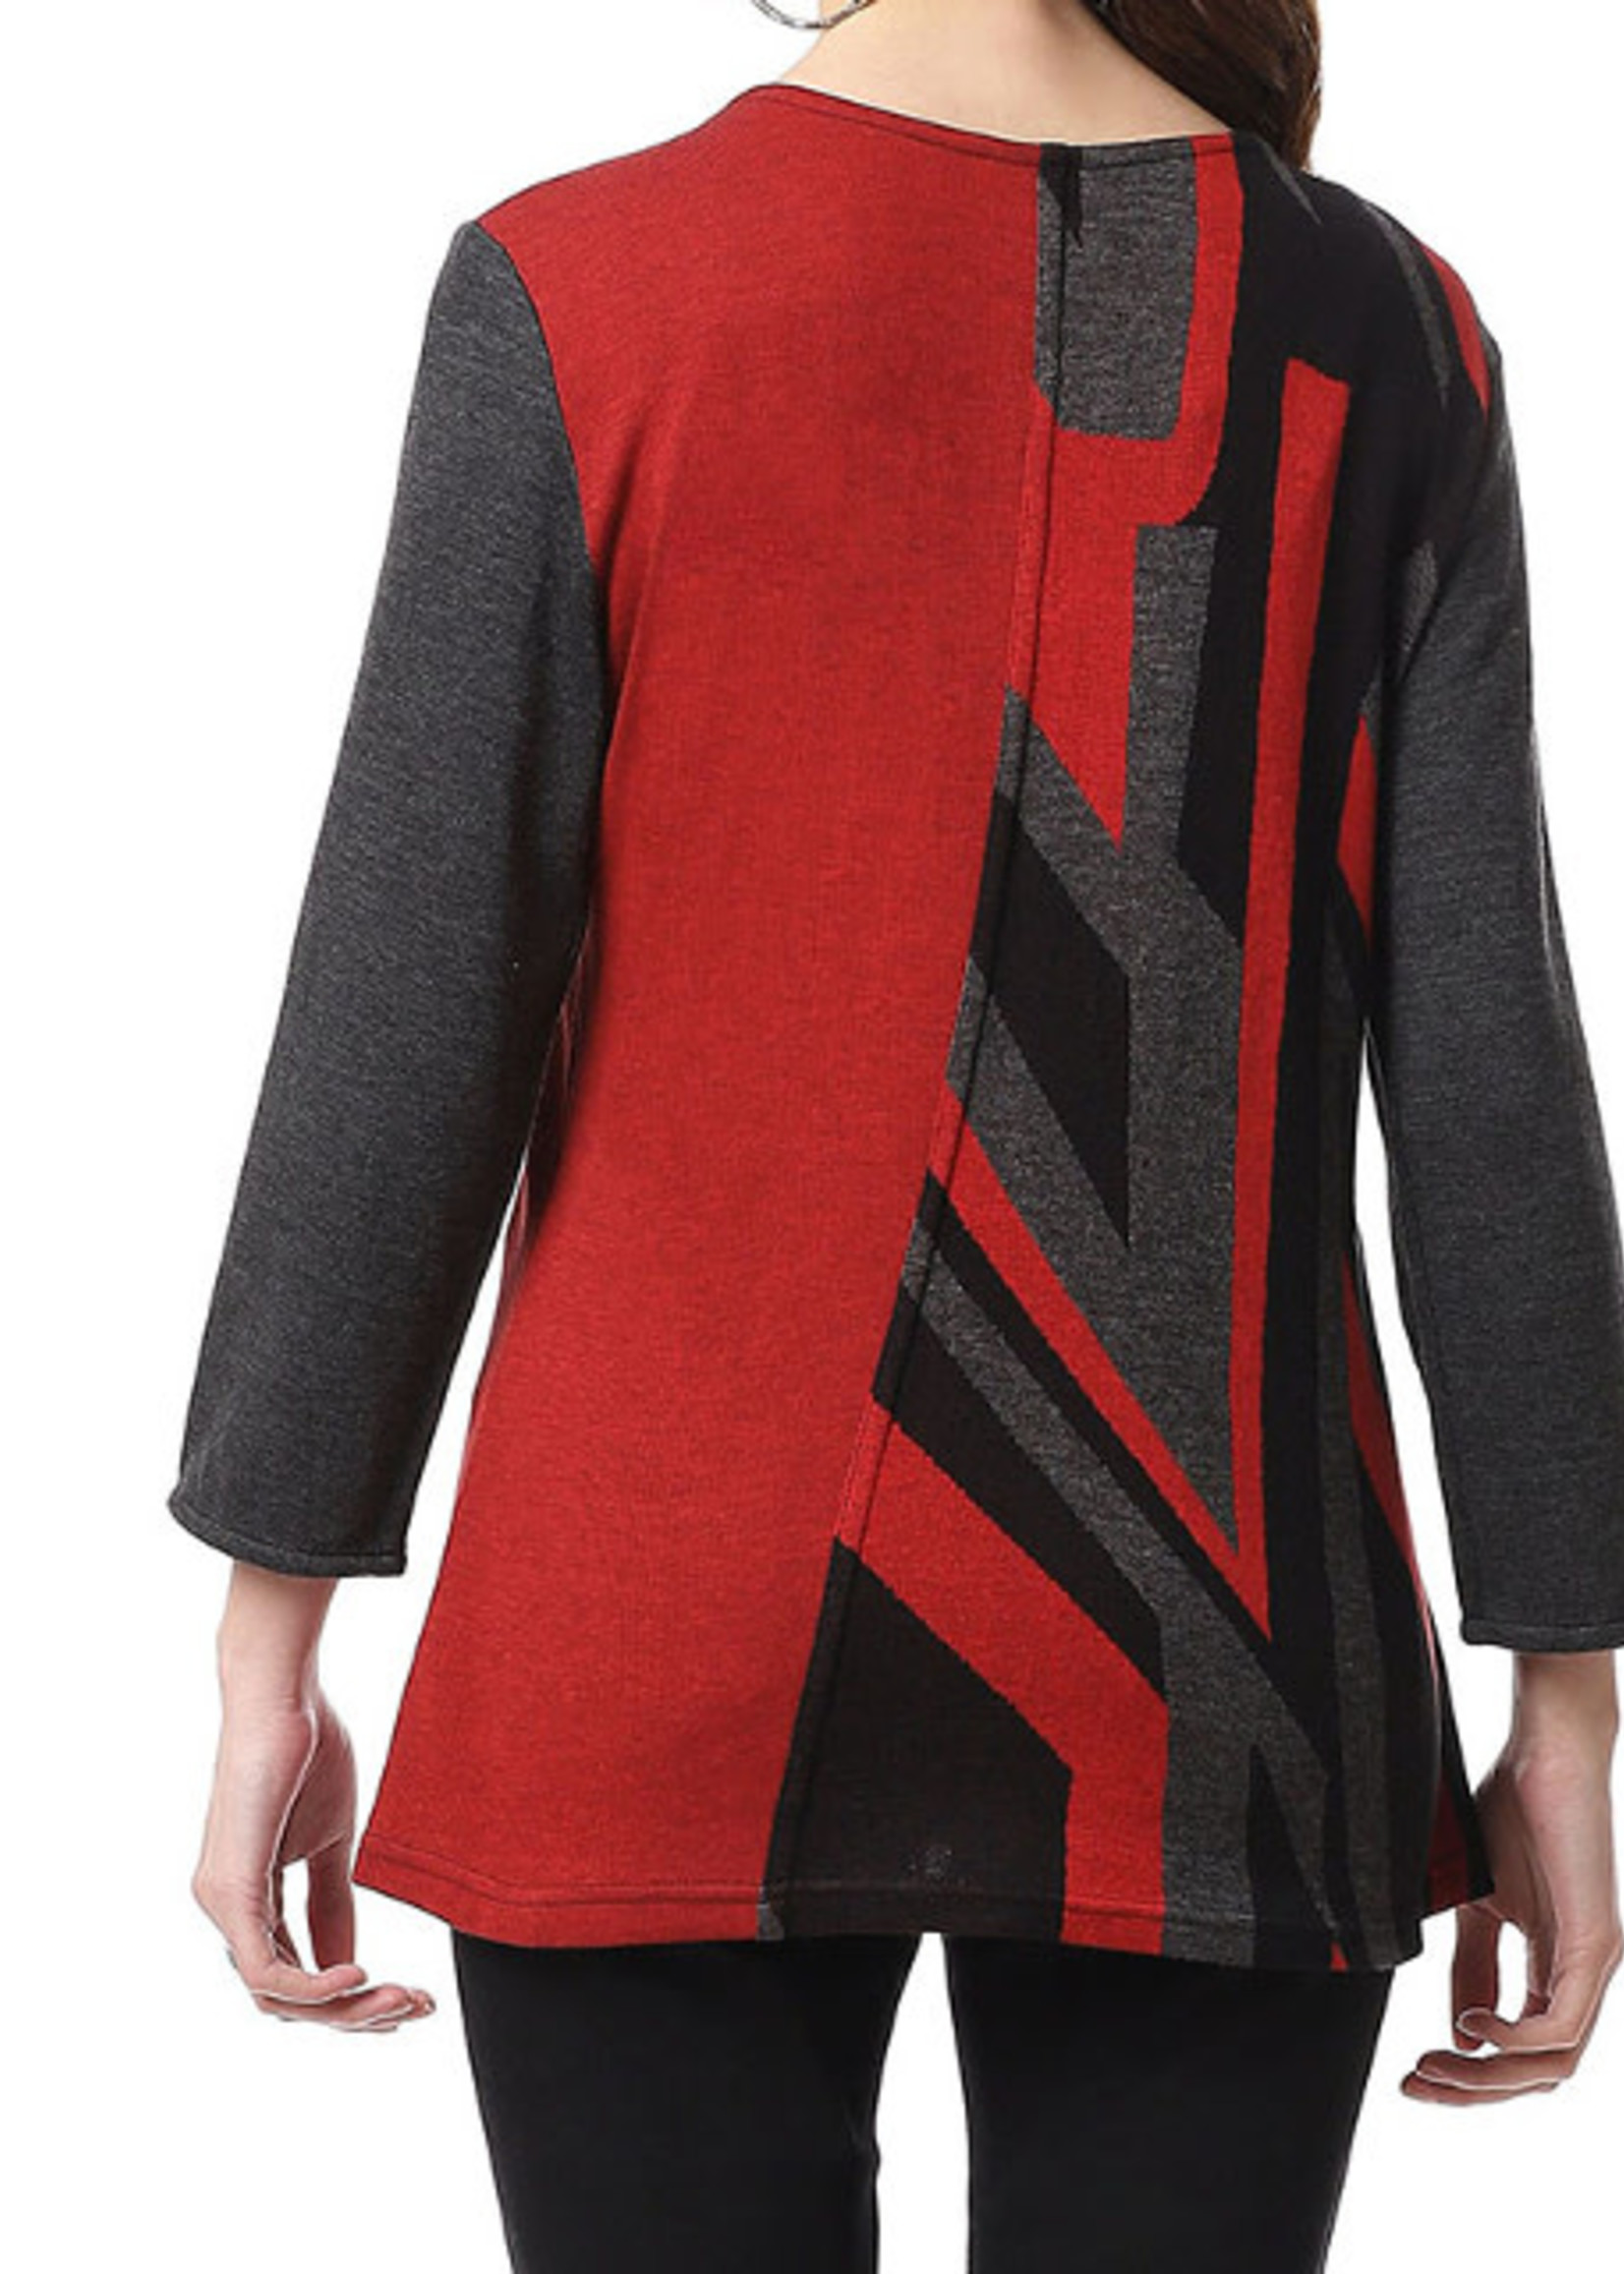 Parsley and Sage Knit Red & Grey Pattern V Neck Button Detail Top